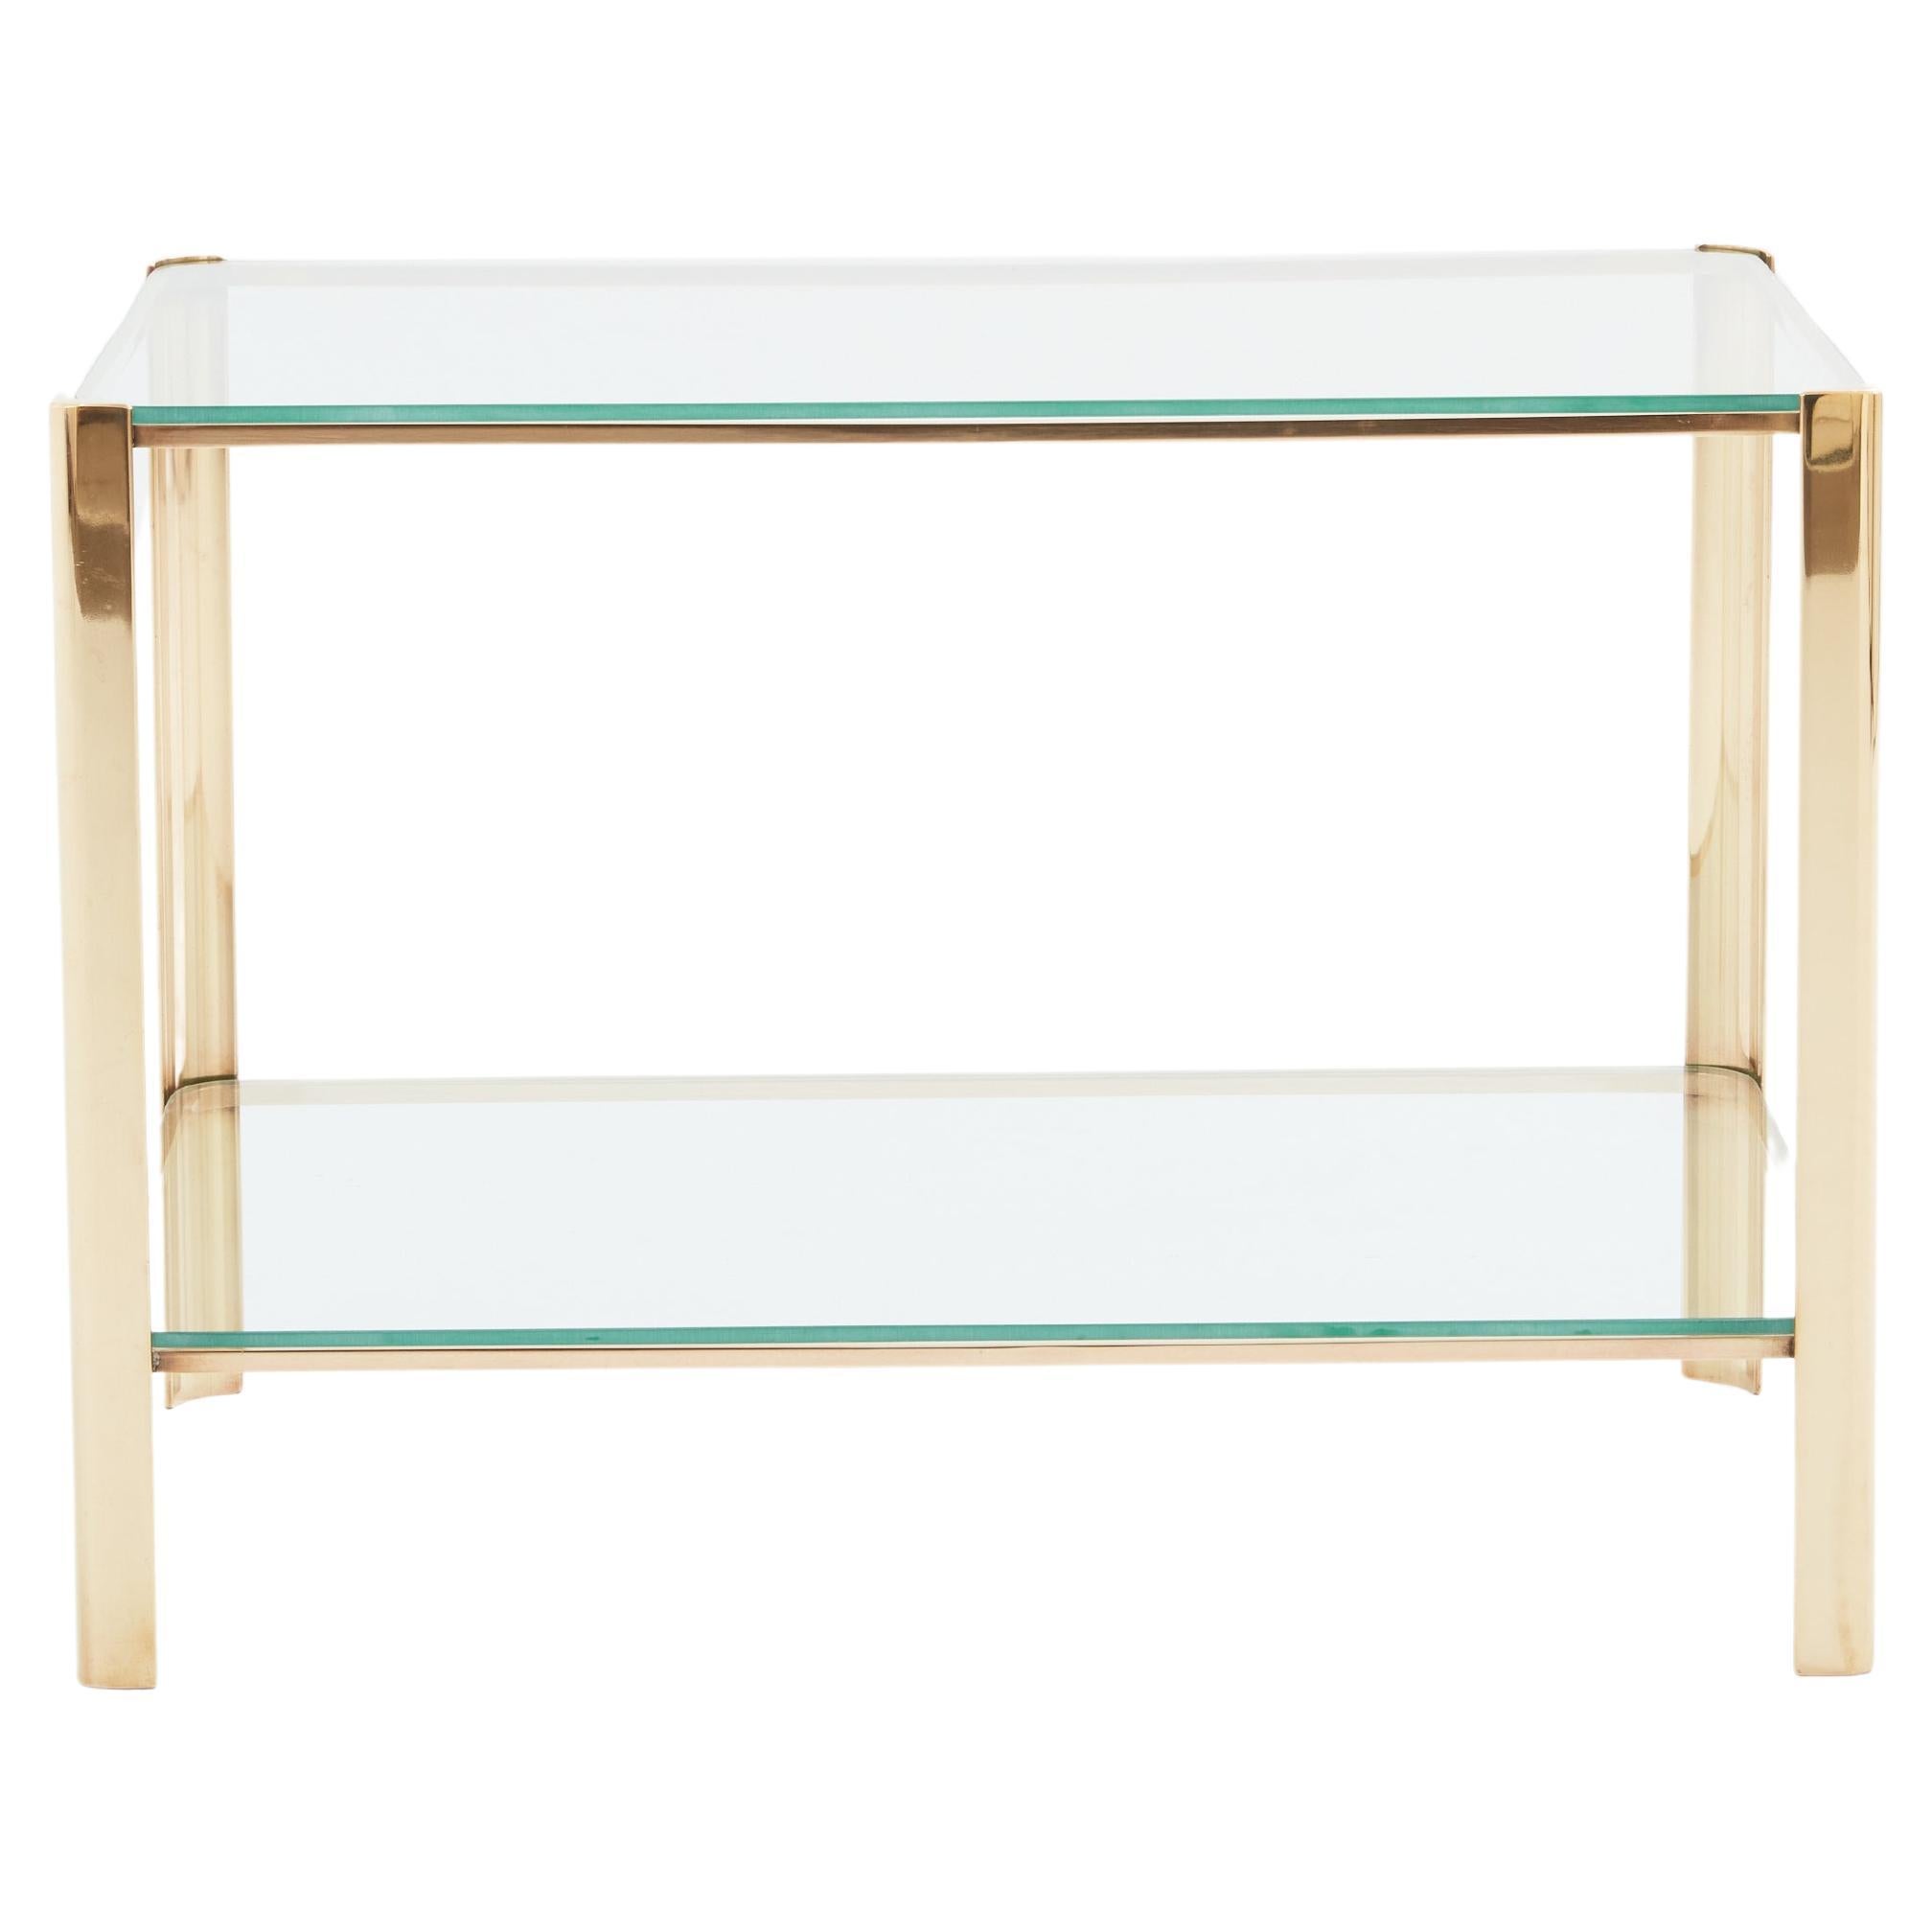 Two-tier Bronze glass side table by Jacques Quinet for Broncz 1960s For Sale